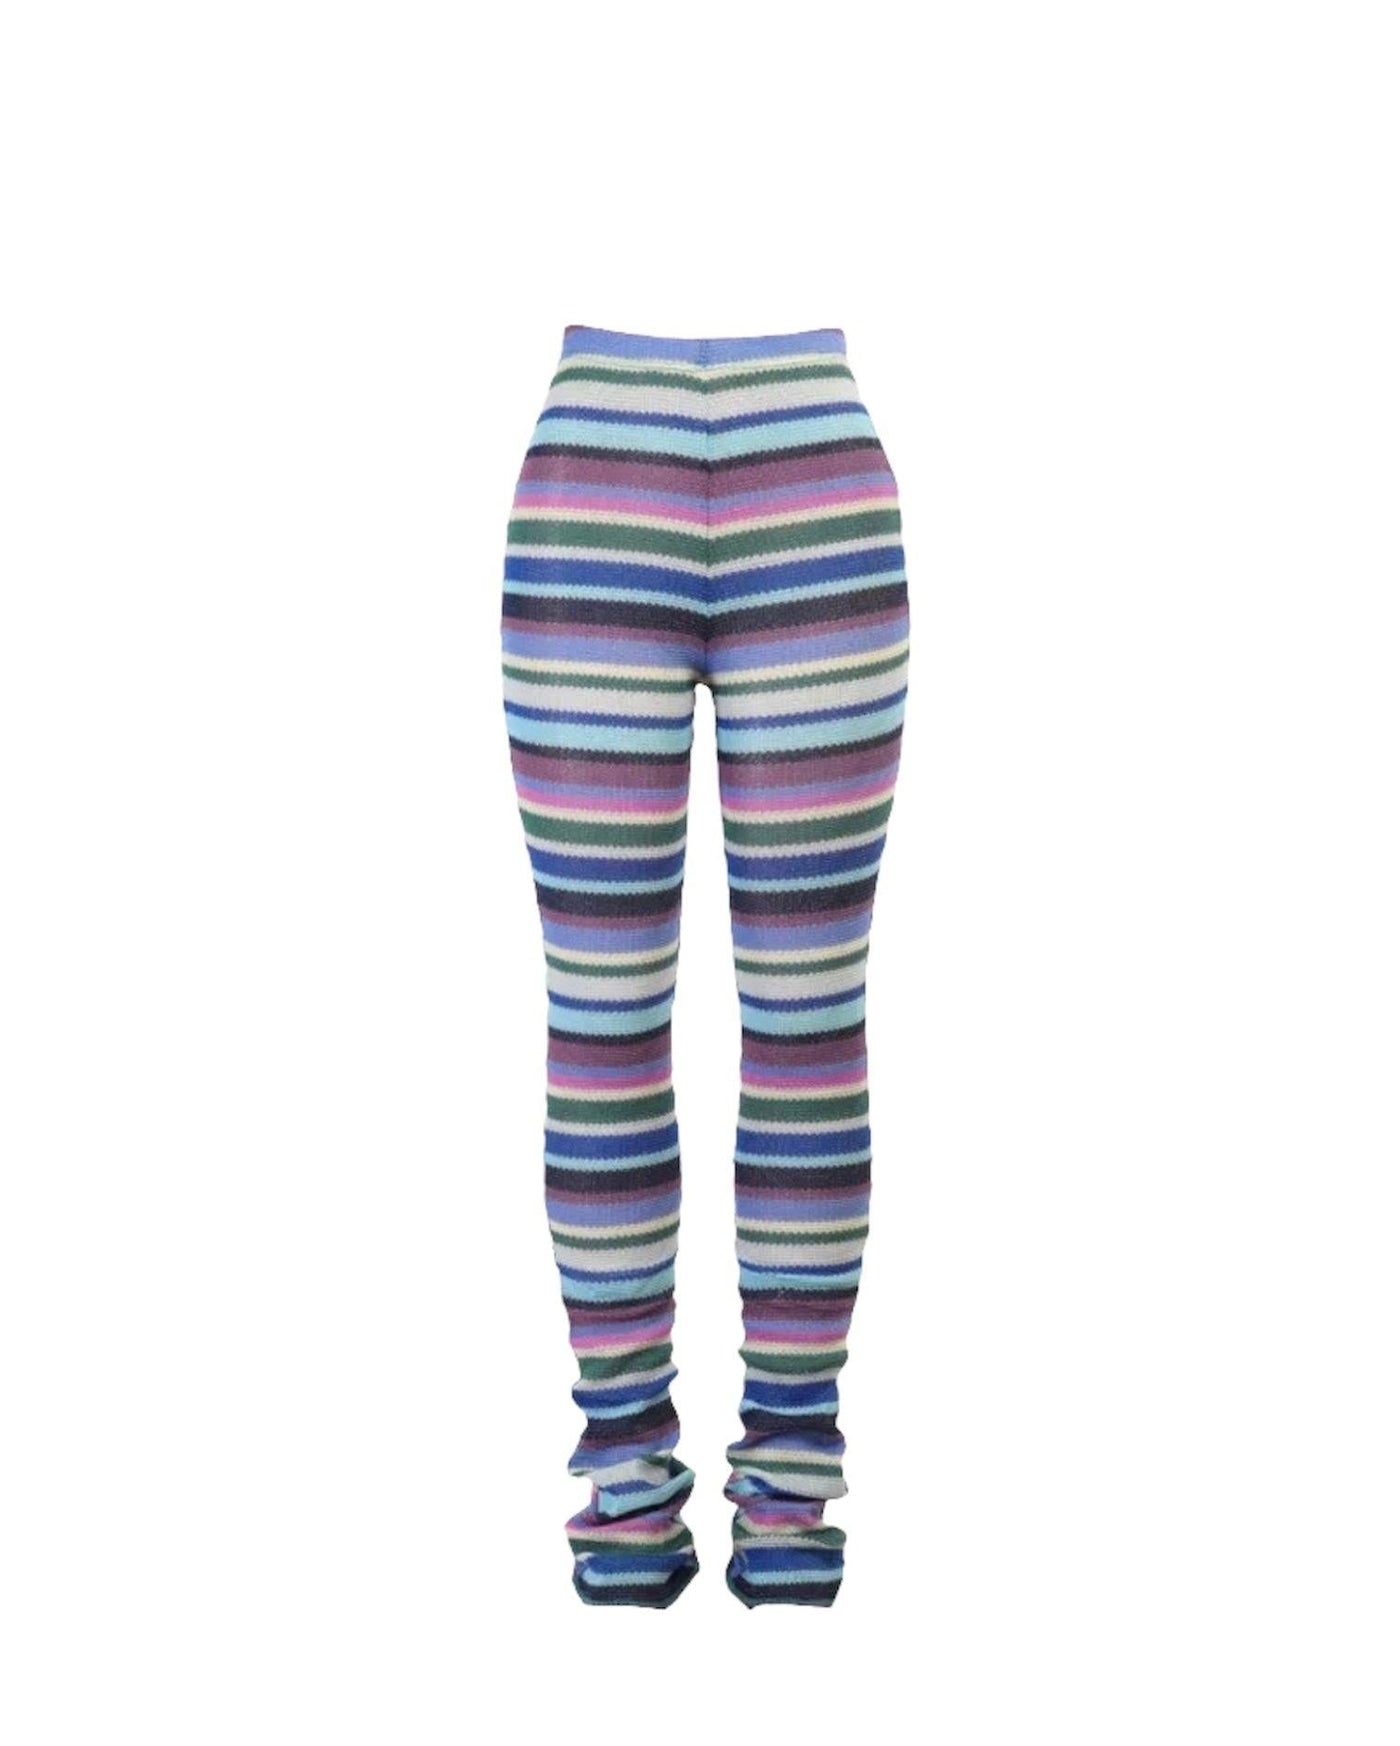 Vibing Striped Up Leggings - Dezired Beauty Boutique